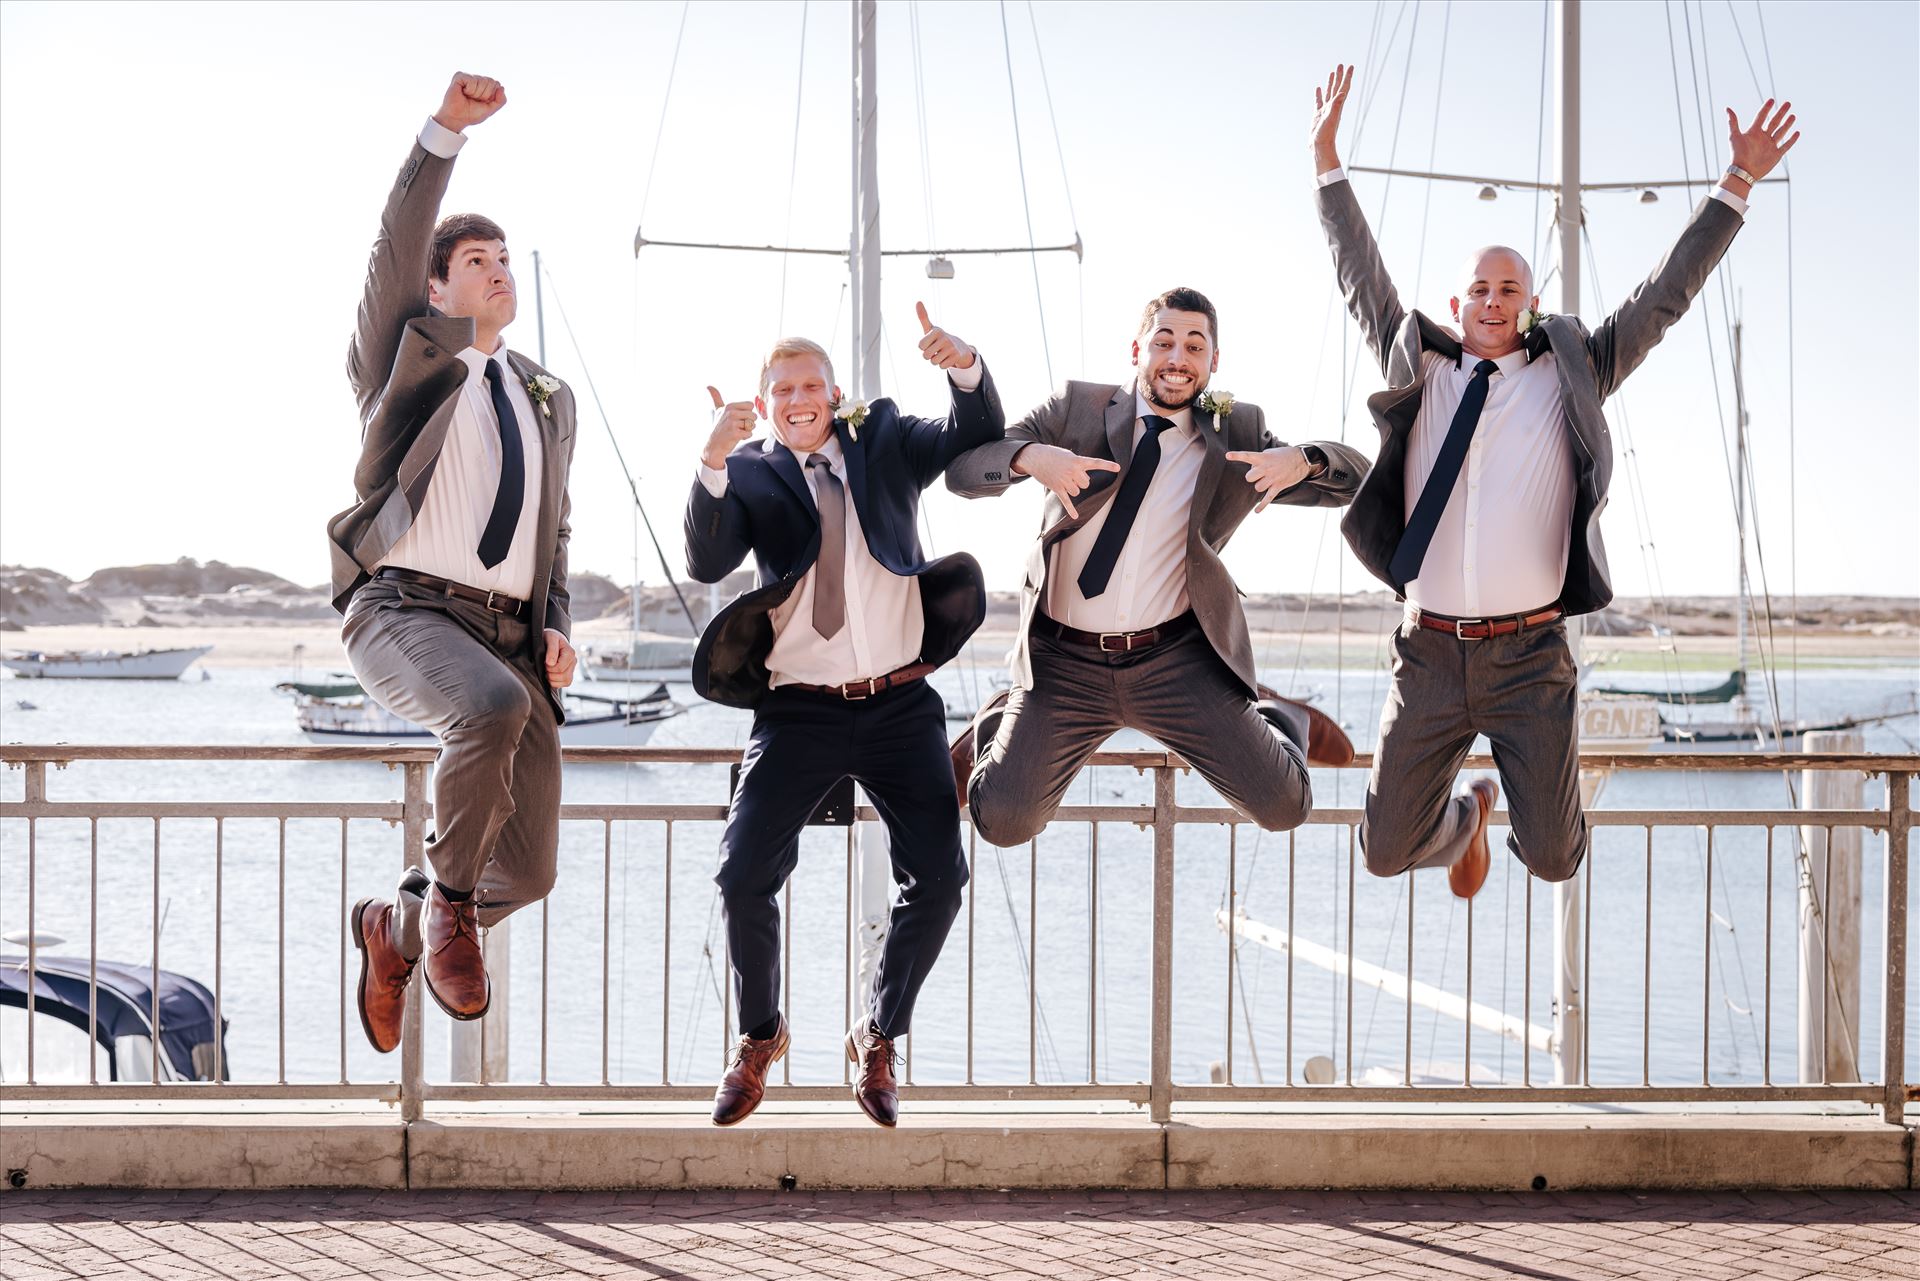 FW-9596.JPG - Sarah Williams of Mirror's Edge Photography, a San Luis Obispo Wedding and Engagement Photographer, captures Ryan and Joanna's wedding at the iconic Windows on the Water Restaurant in Morro Bay, California.  Groomsmen jump in front of Morro Rock. by Sarah Williams